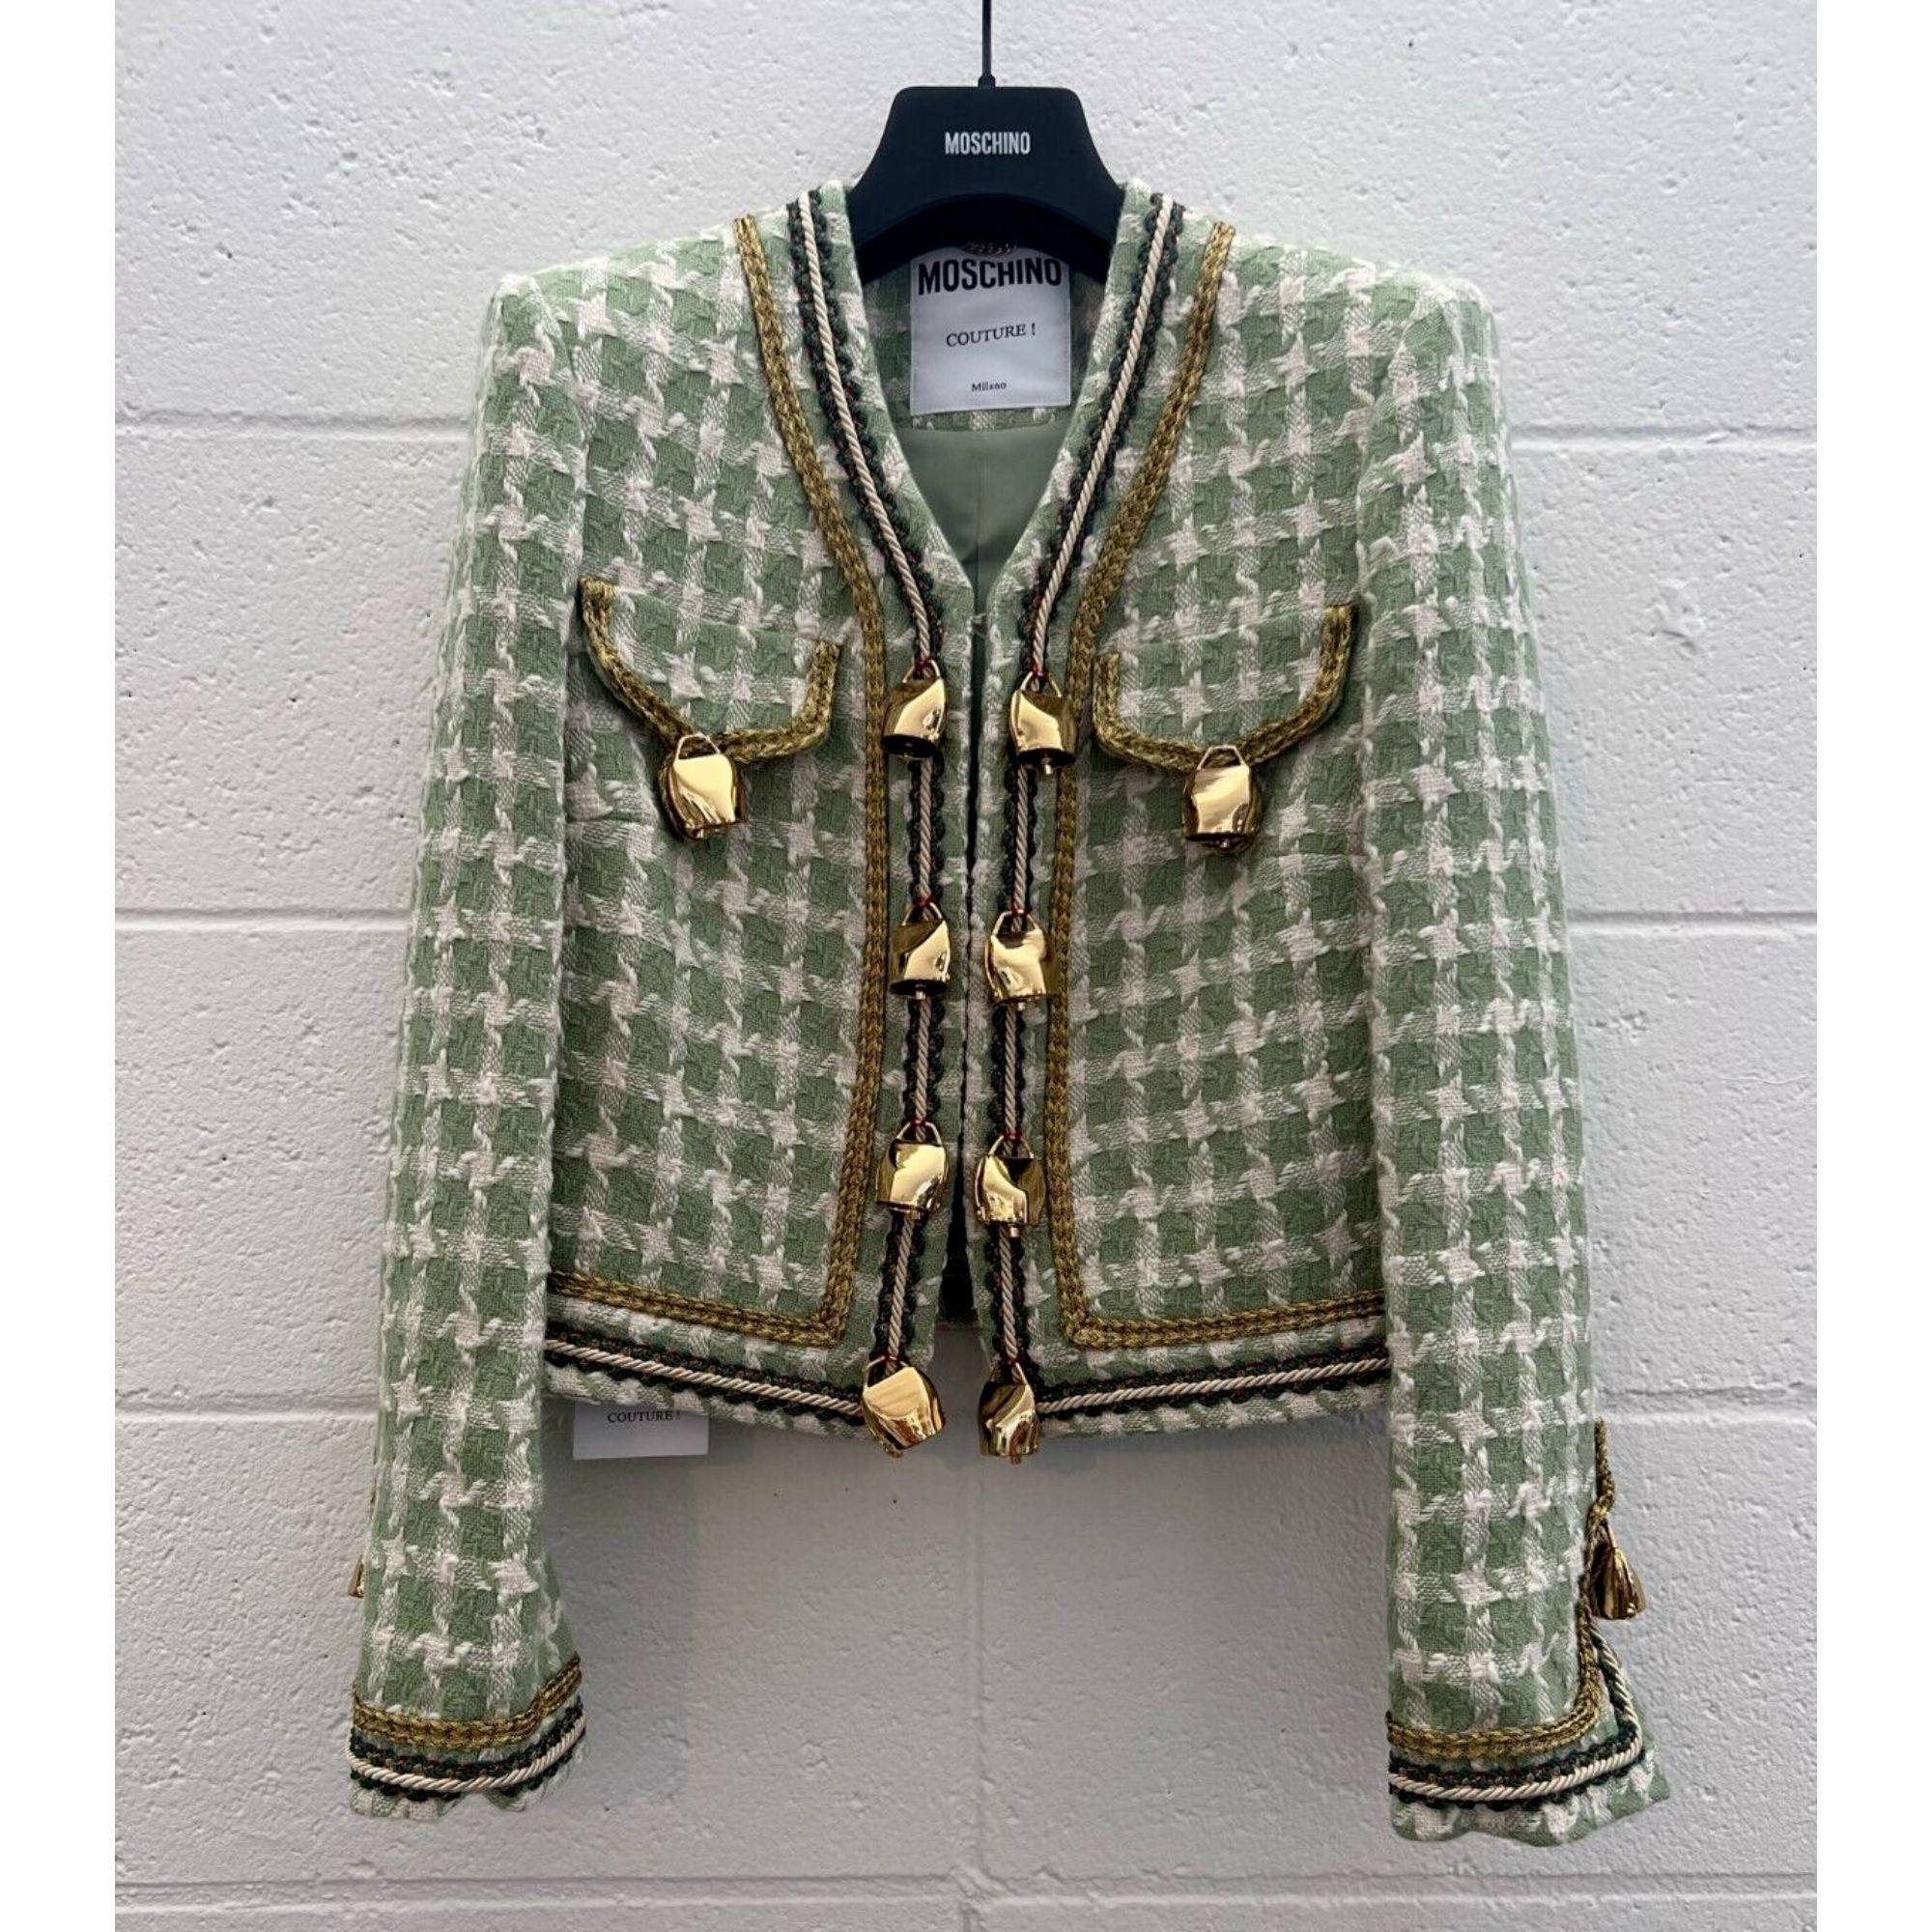 AW21 Moschino Couture Wool Cotton Jacket with Cow Bells by Jeremy Scott In New Condition For Sale In Matthews, NC